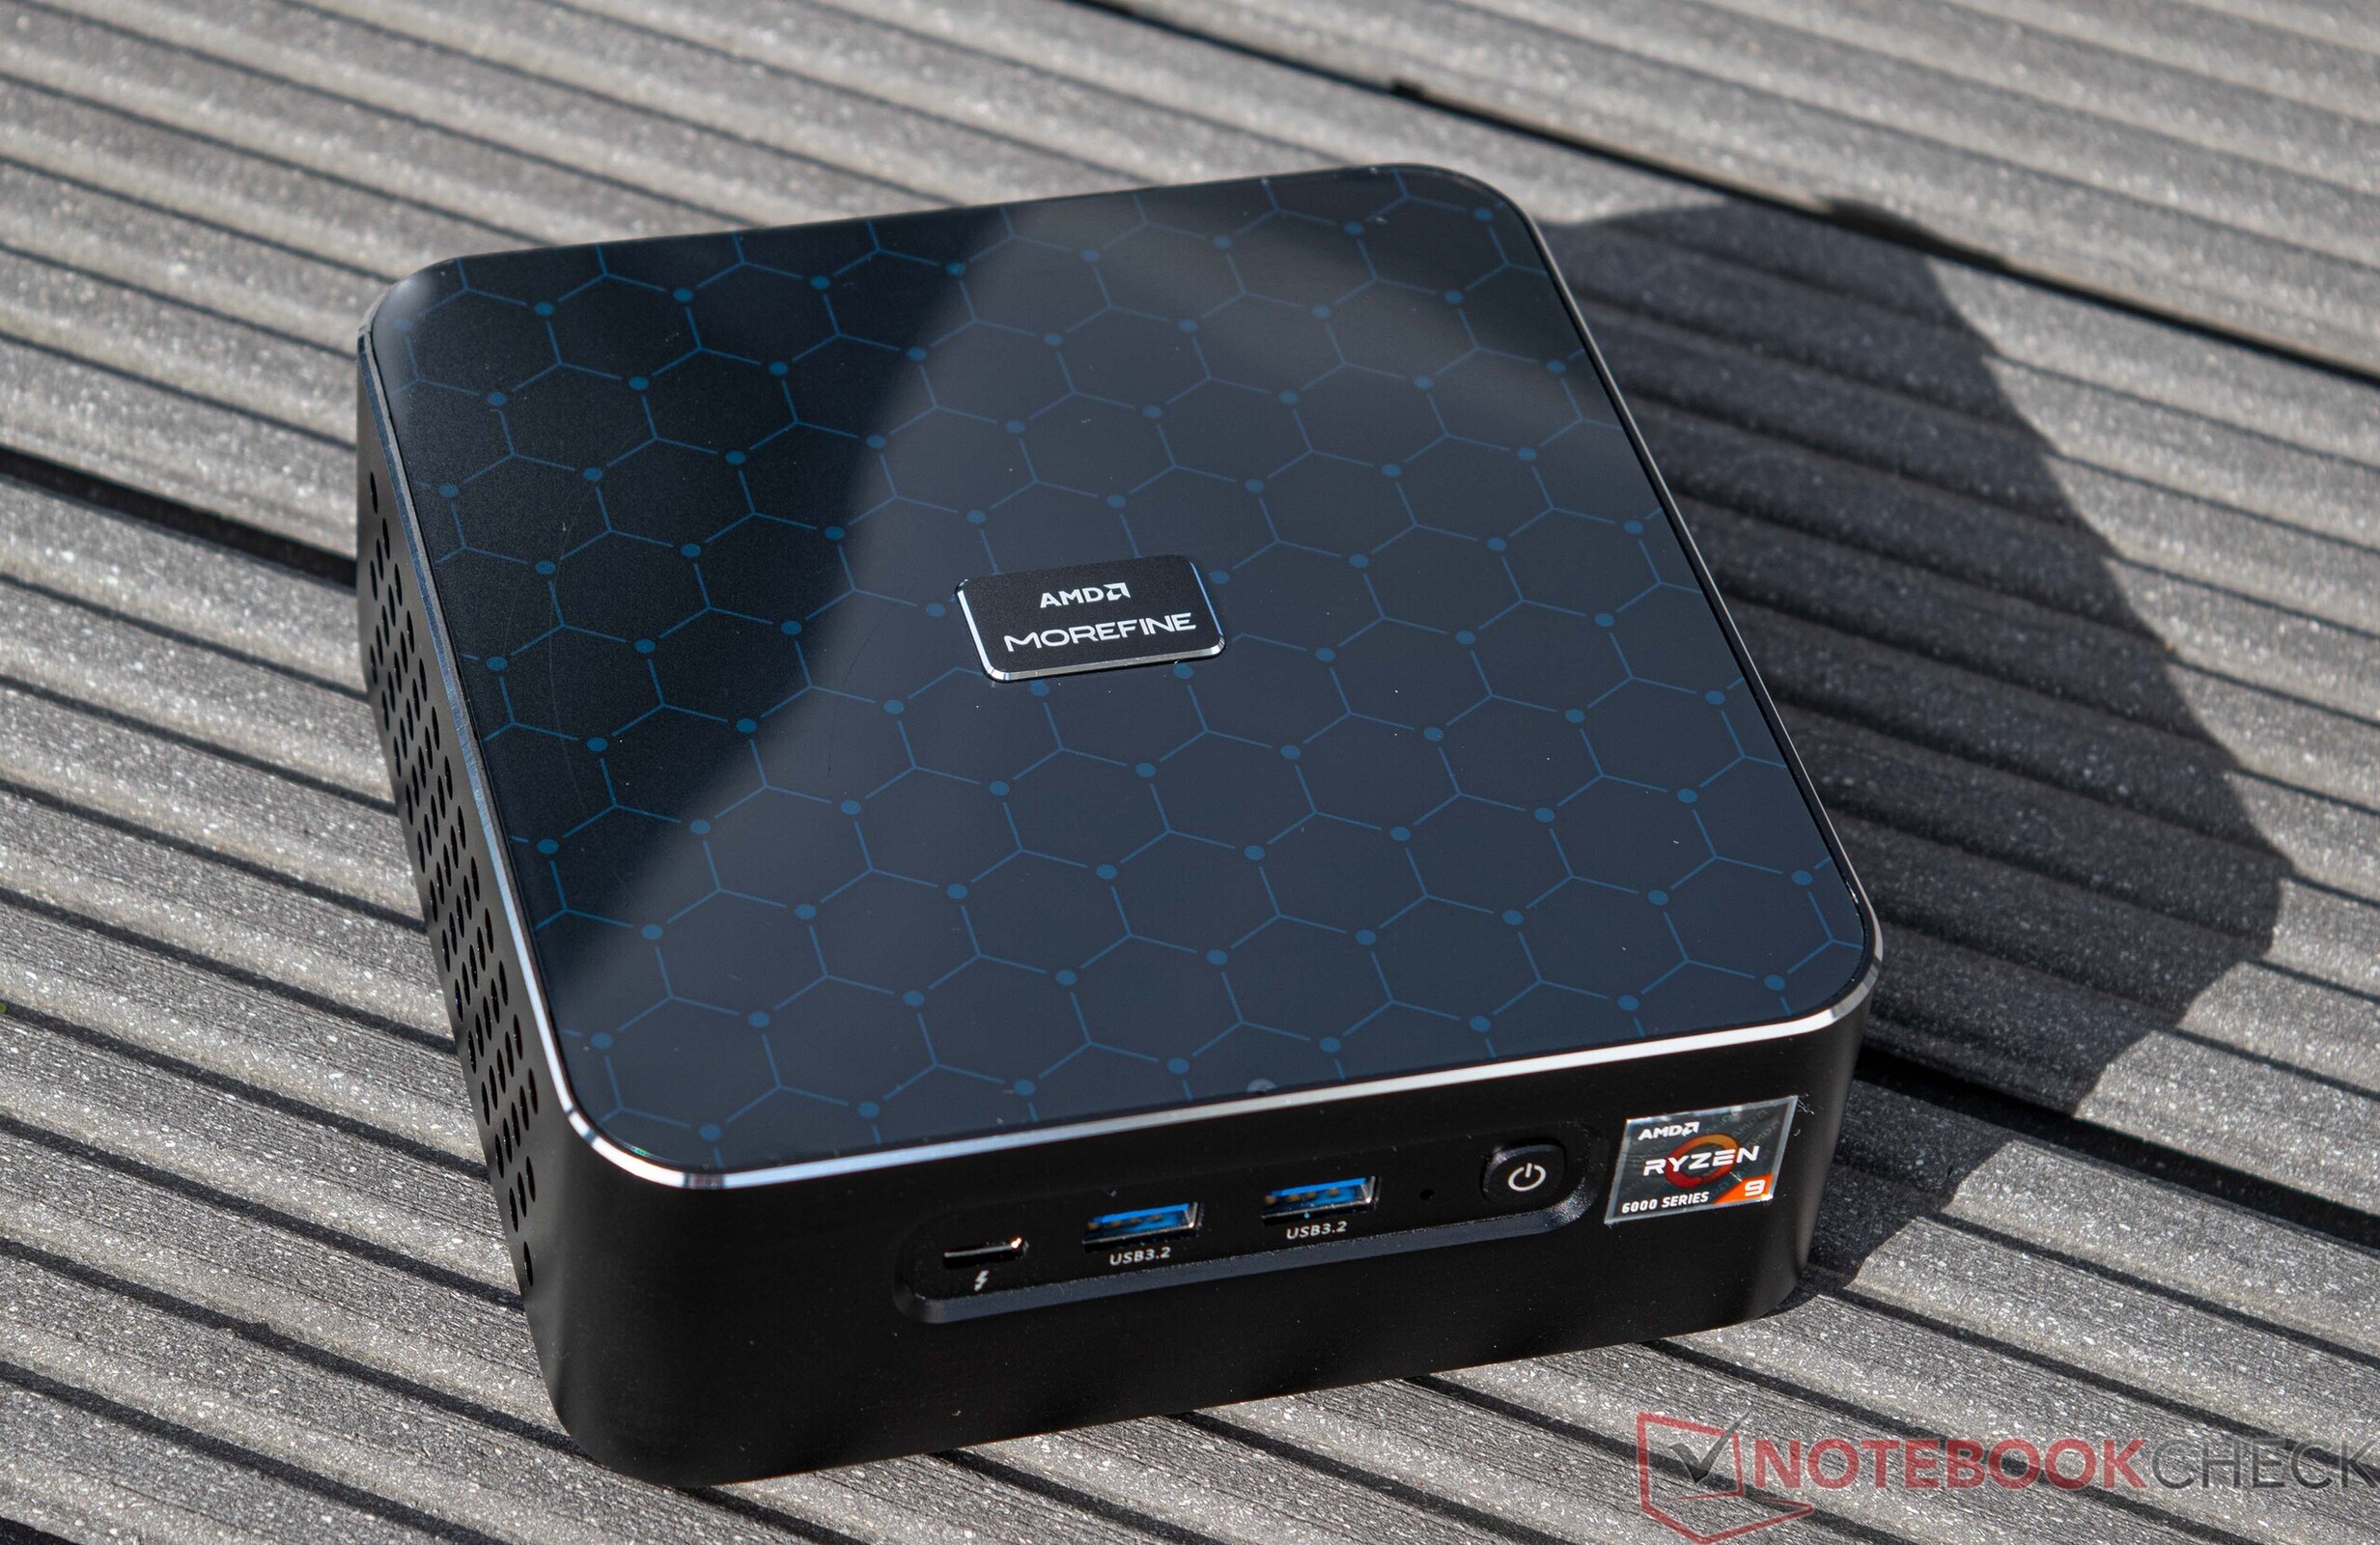 Chatreey AM08 mini PC now available with Ryzen 9 6900HX or Ryzen 7